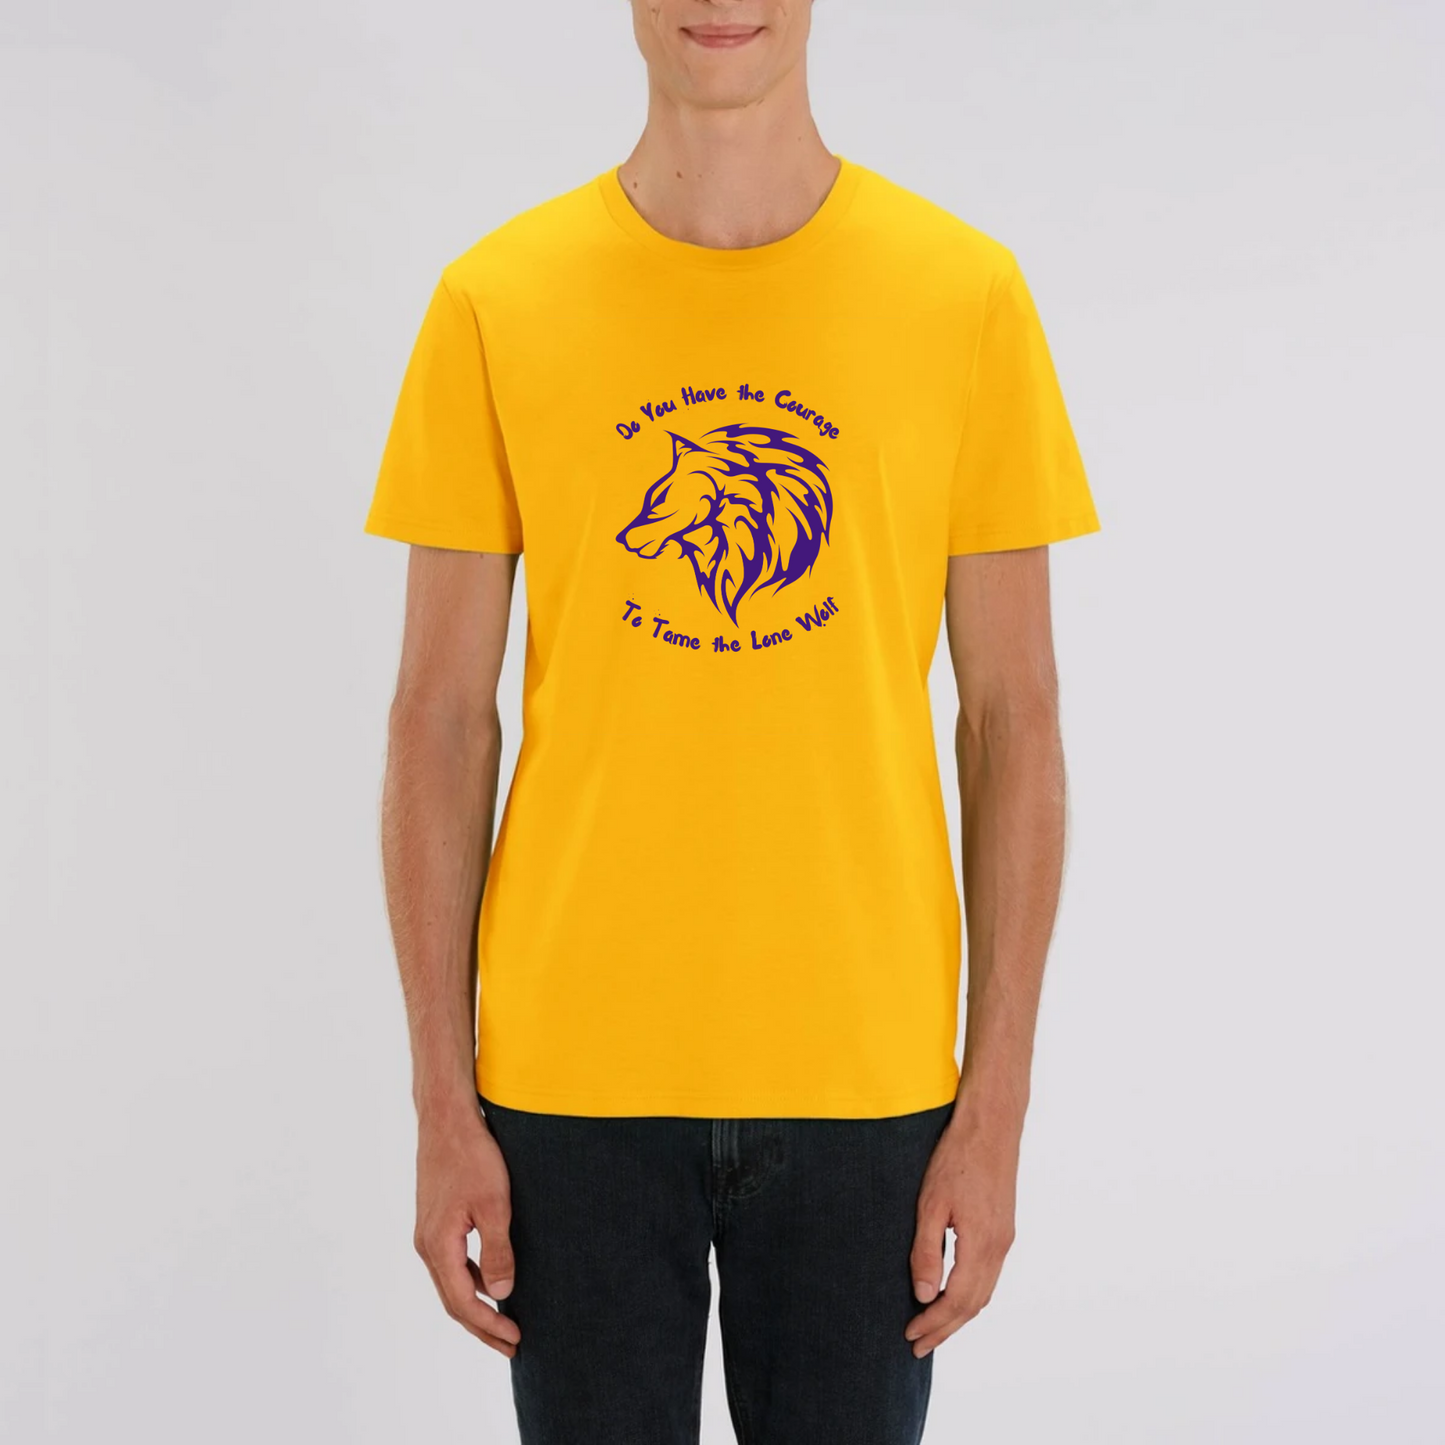 Graphic design t-shirt for men which features the head of a lone male wolf with the words "Do You Have the Courage to Tame the Lone Wolf". The t-shirt is yellow